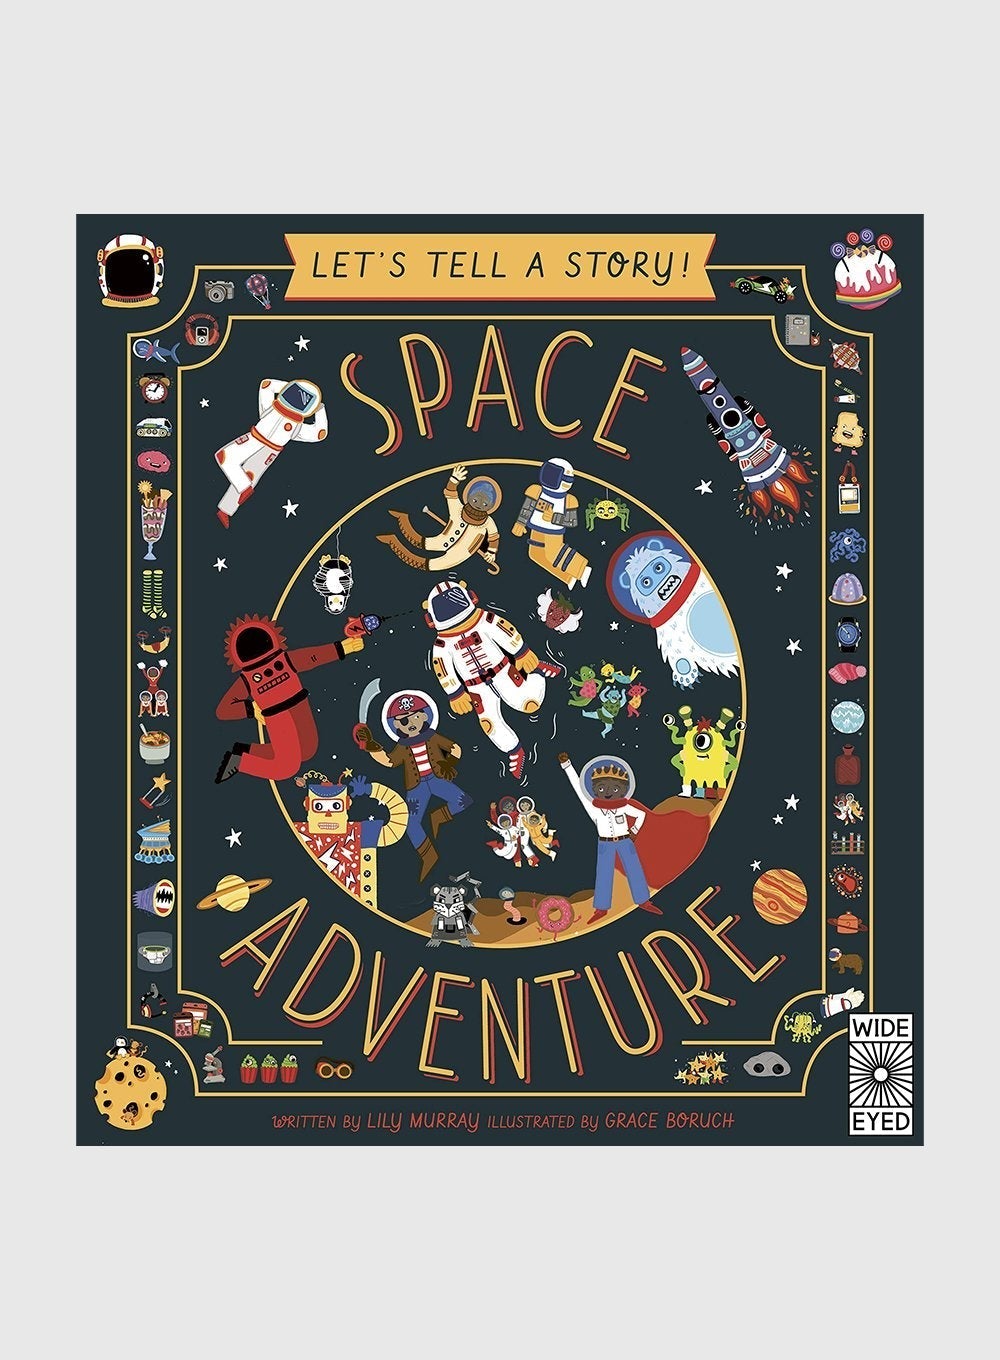 Lily Murray Book Space Adventure - Let's Tell A Story!